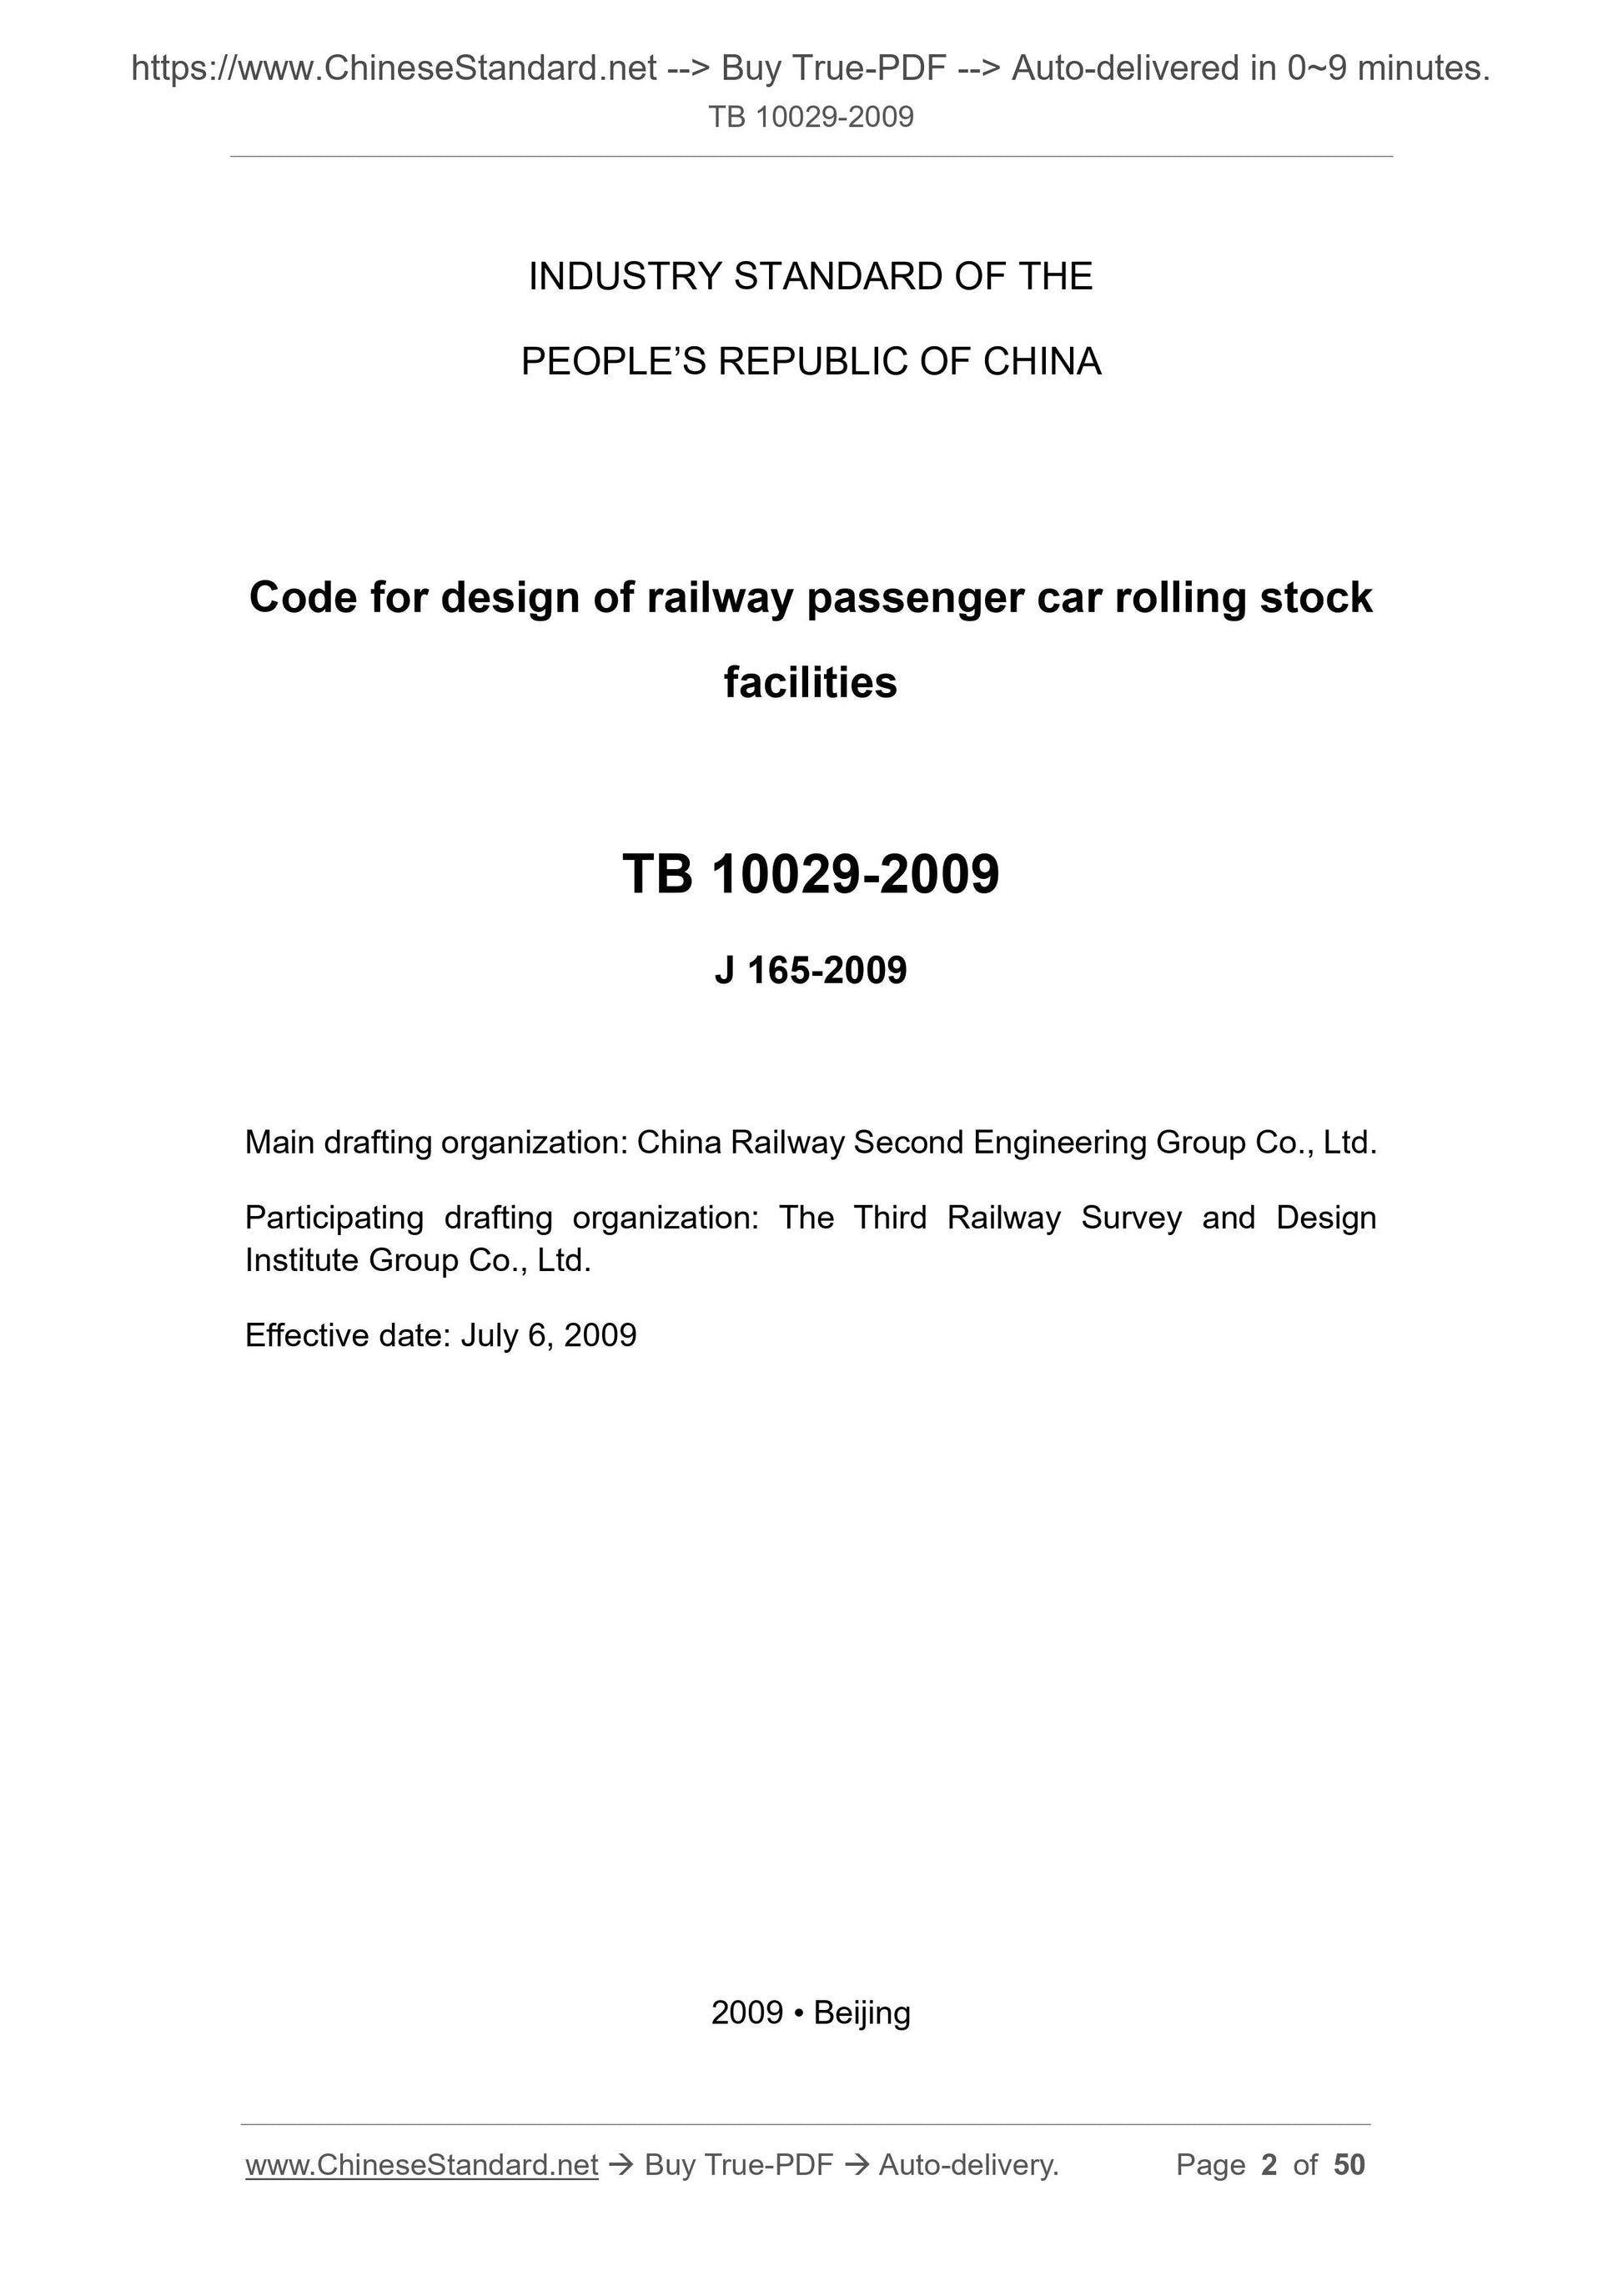 TB 10029-2009 Page 2